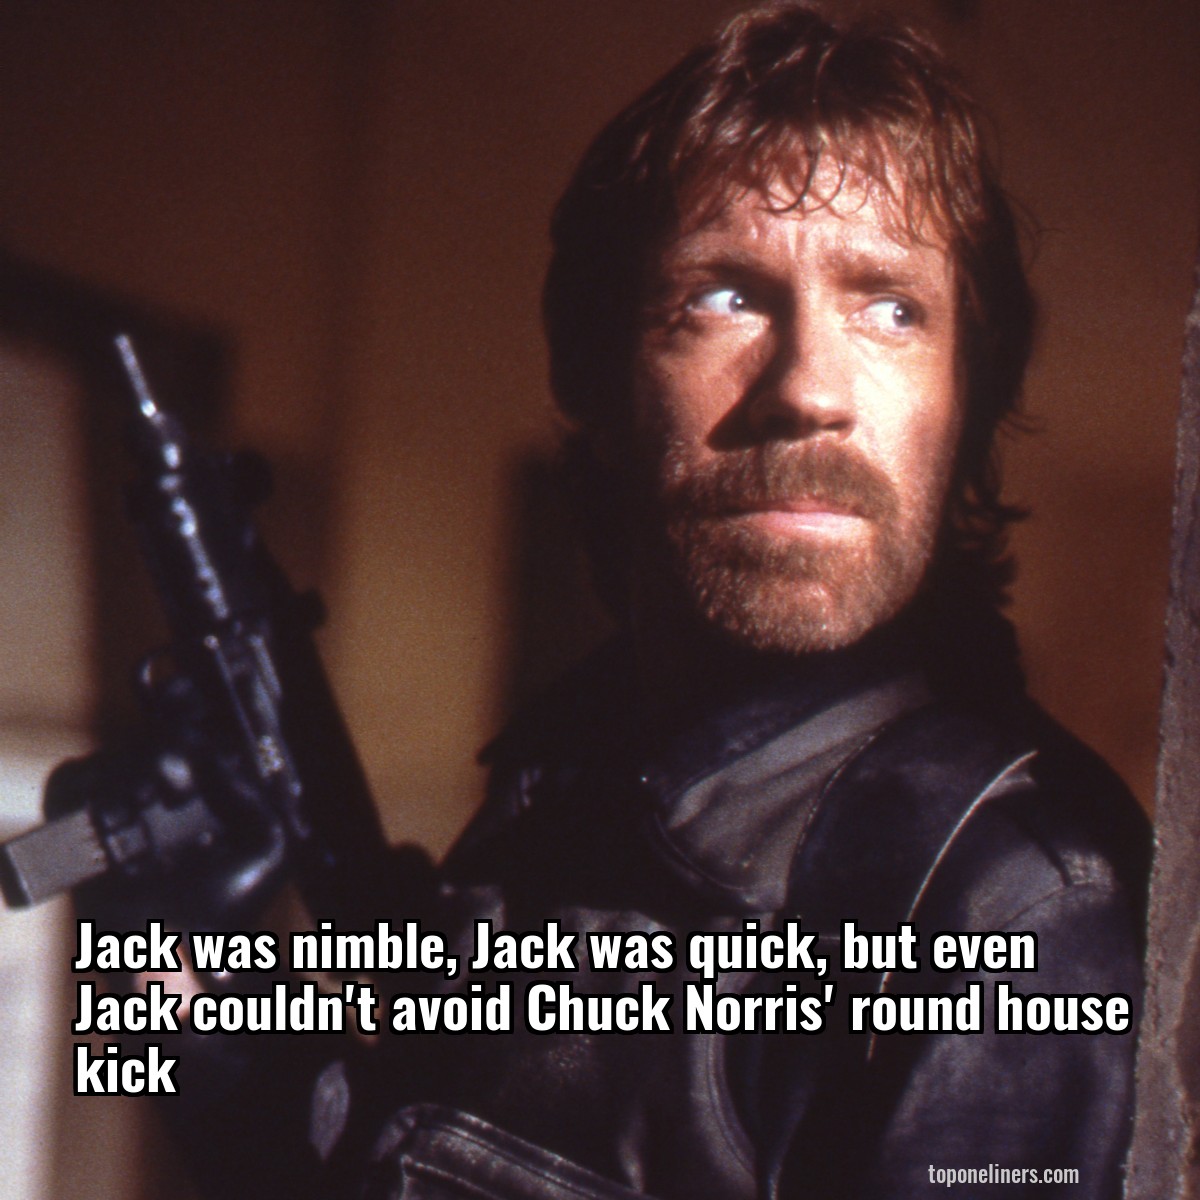 Jack was nimble, Jack was quick, but even Jack couldn't avoid Chuck Norris' round house kick